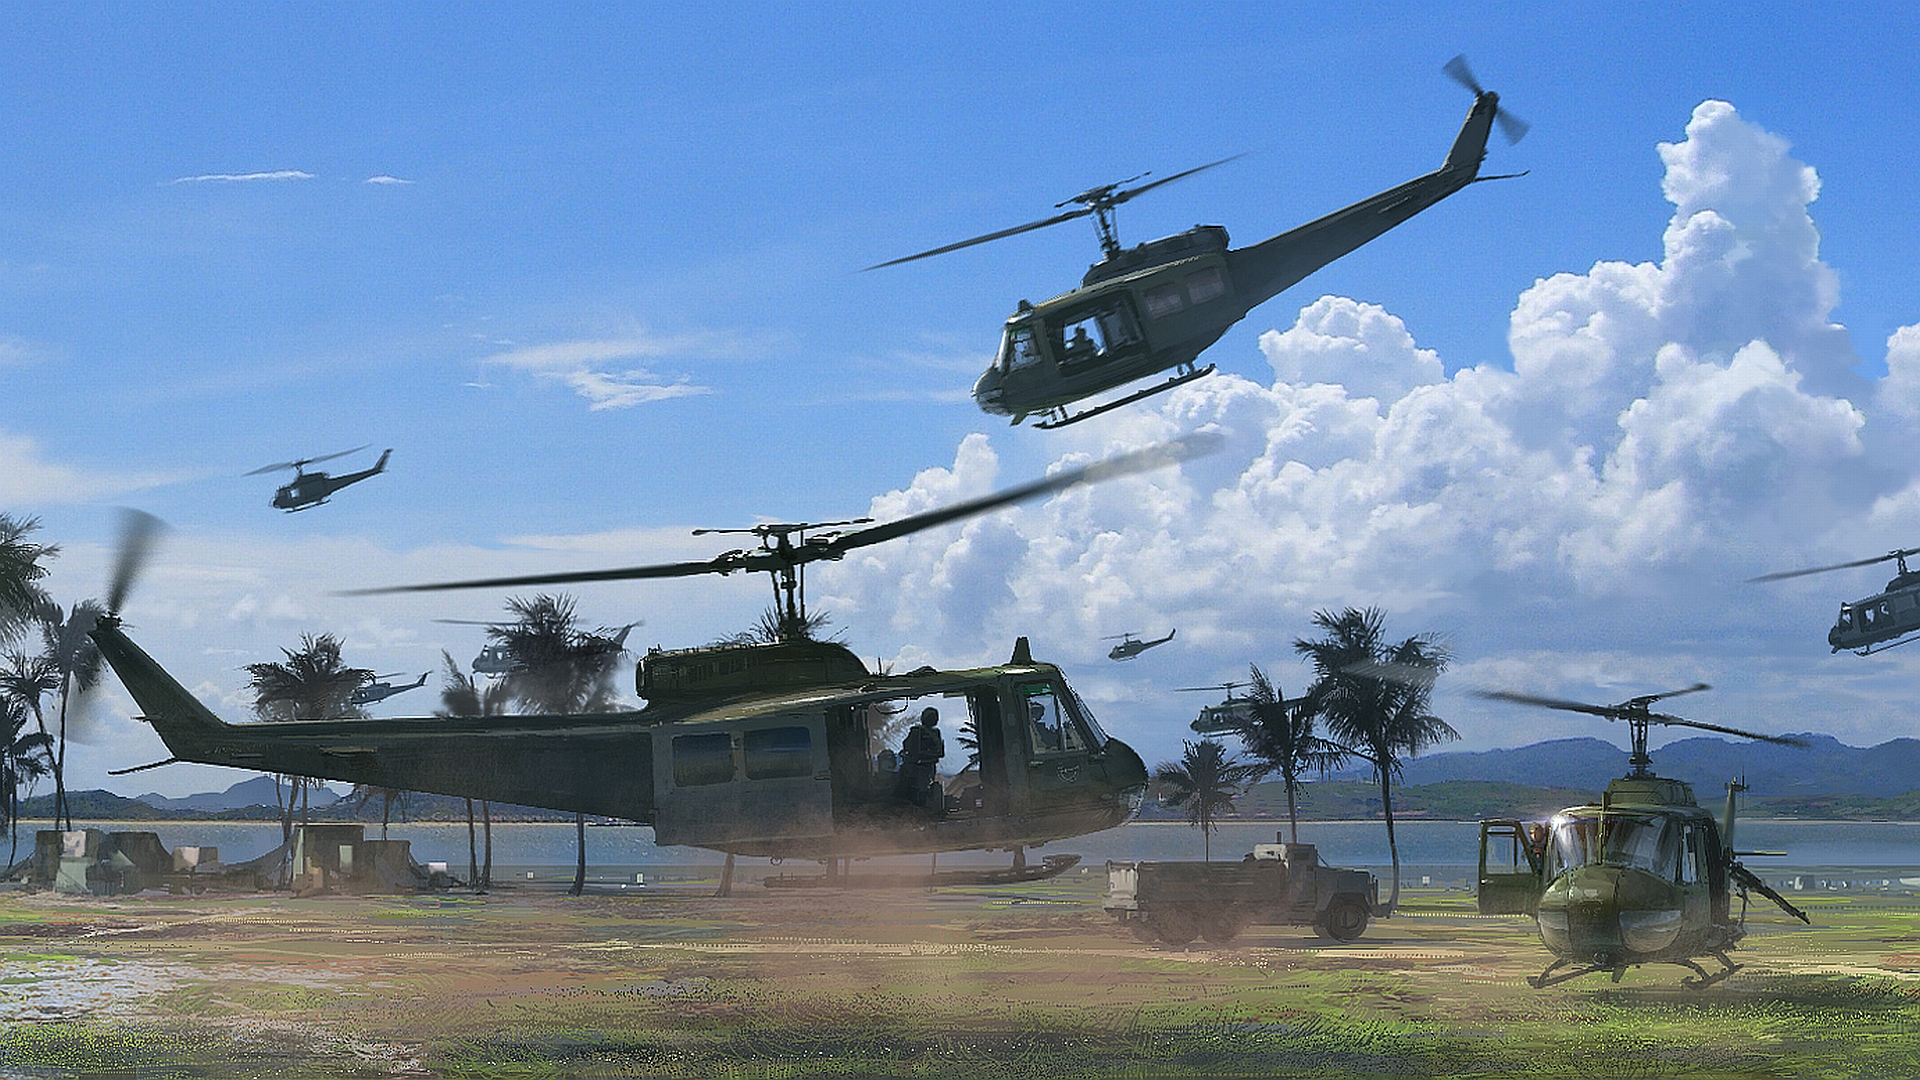 Download Military Helicopter Wallpaper 1920x1080